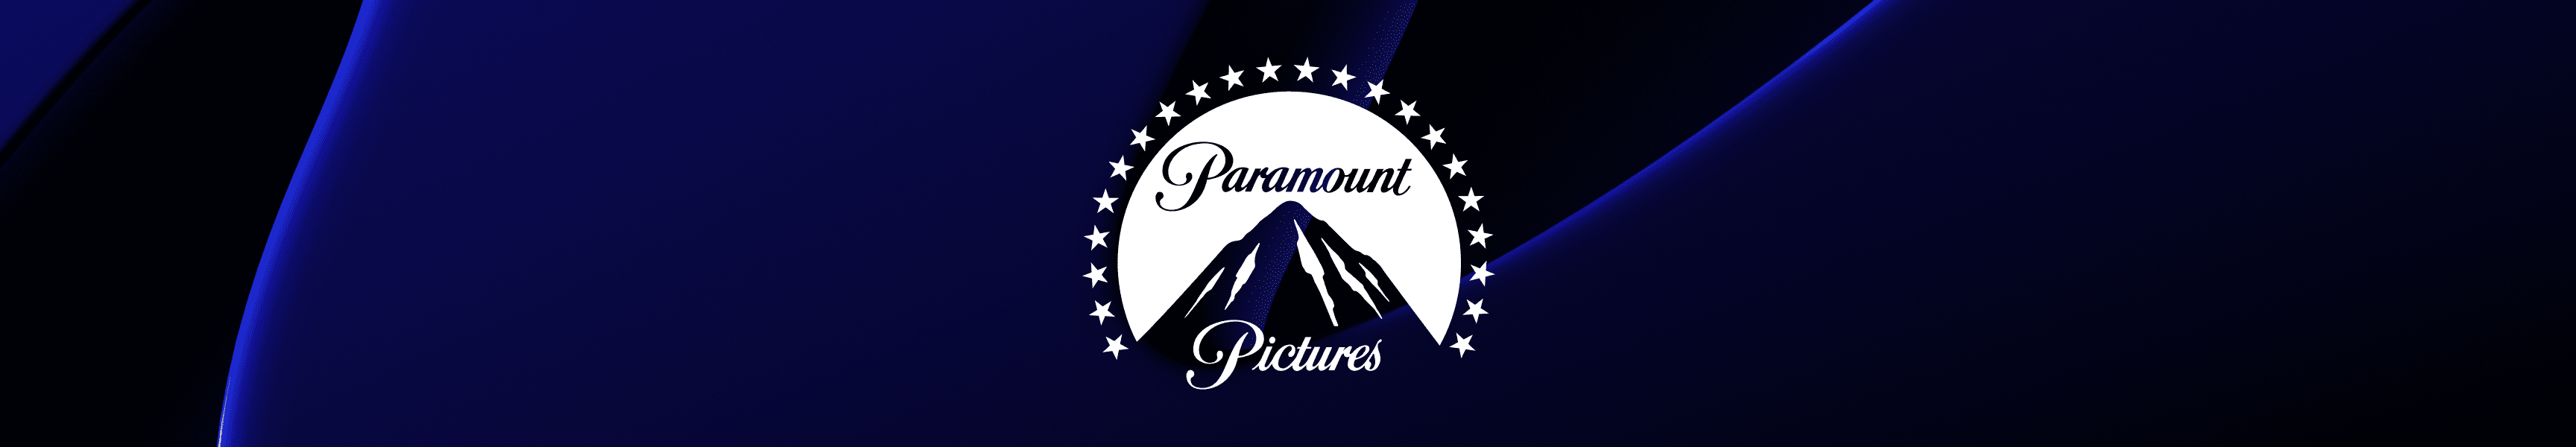 Paramount Pictures DVD